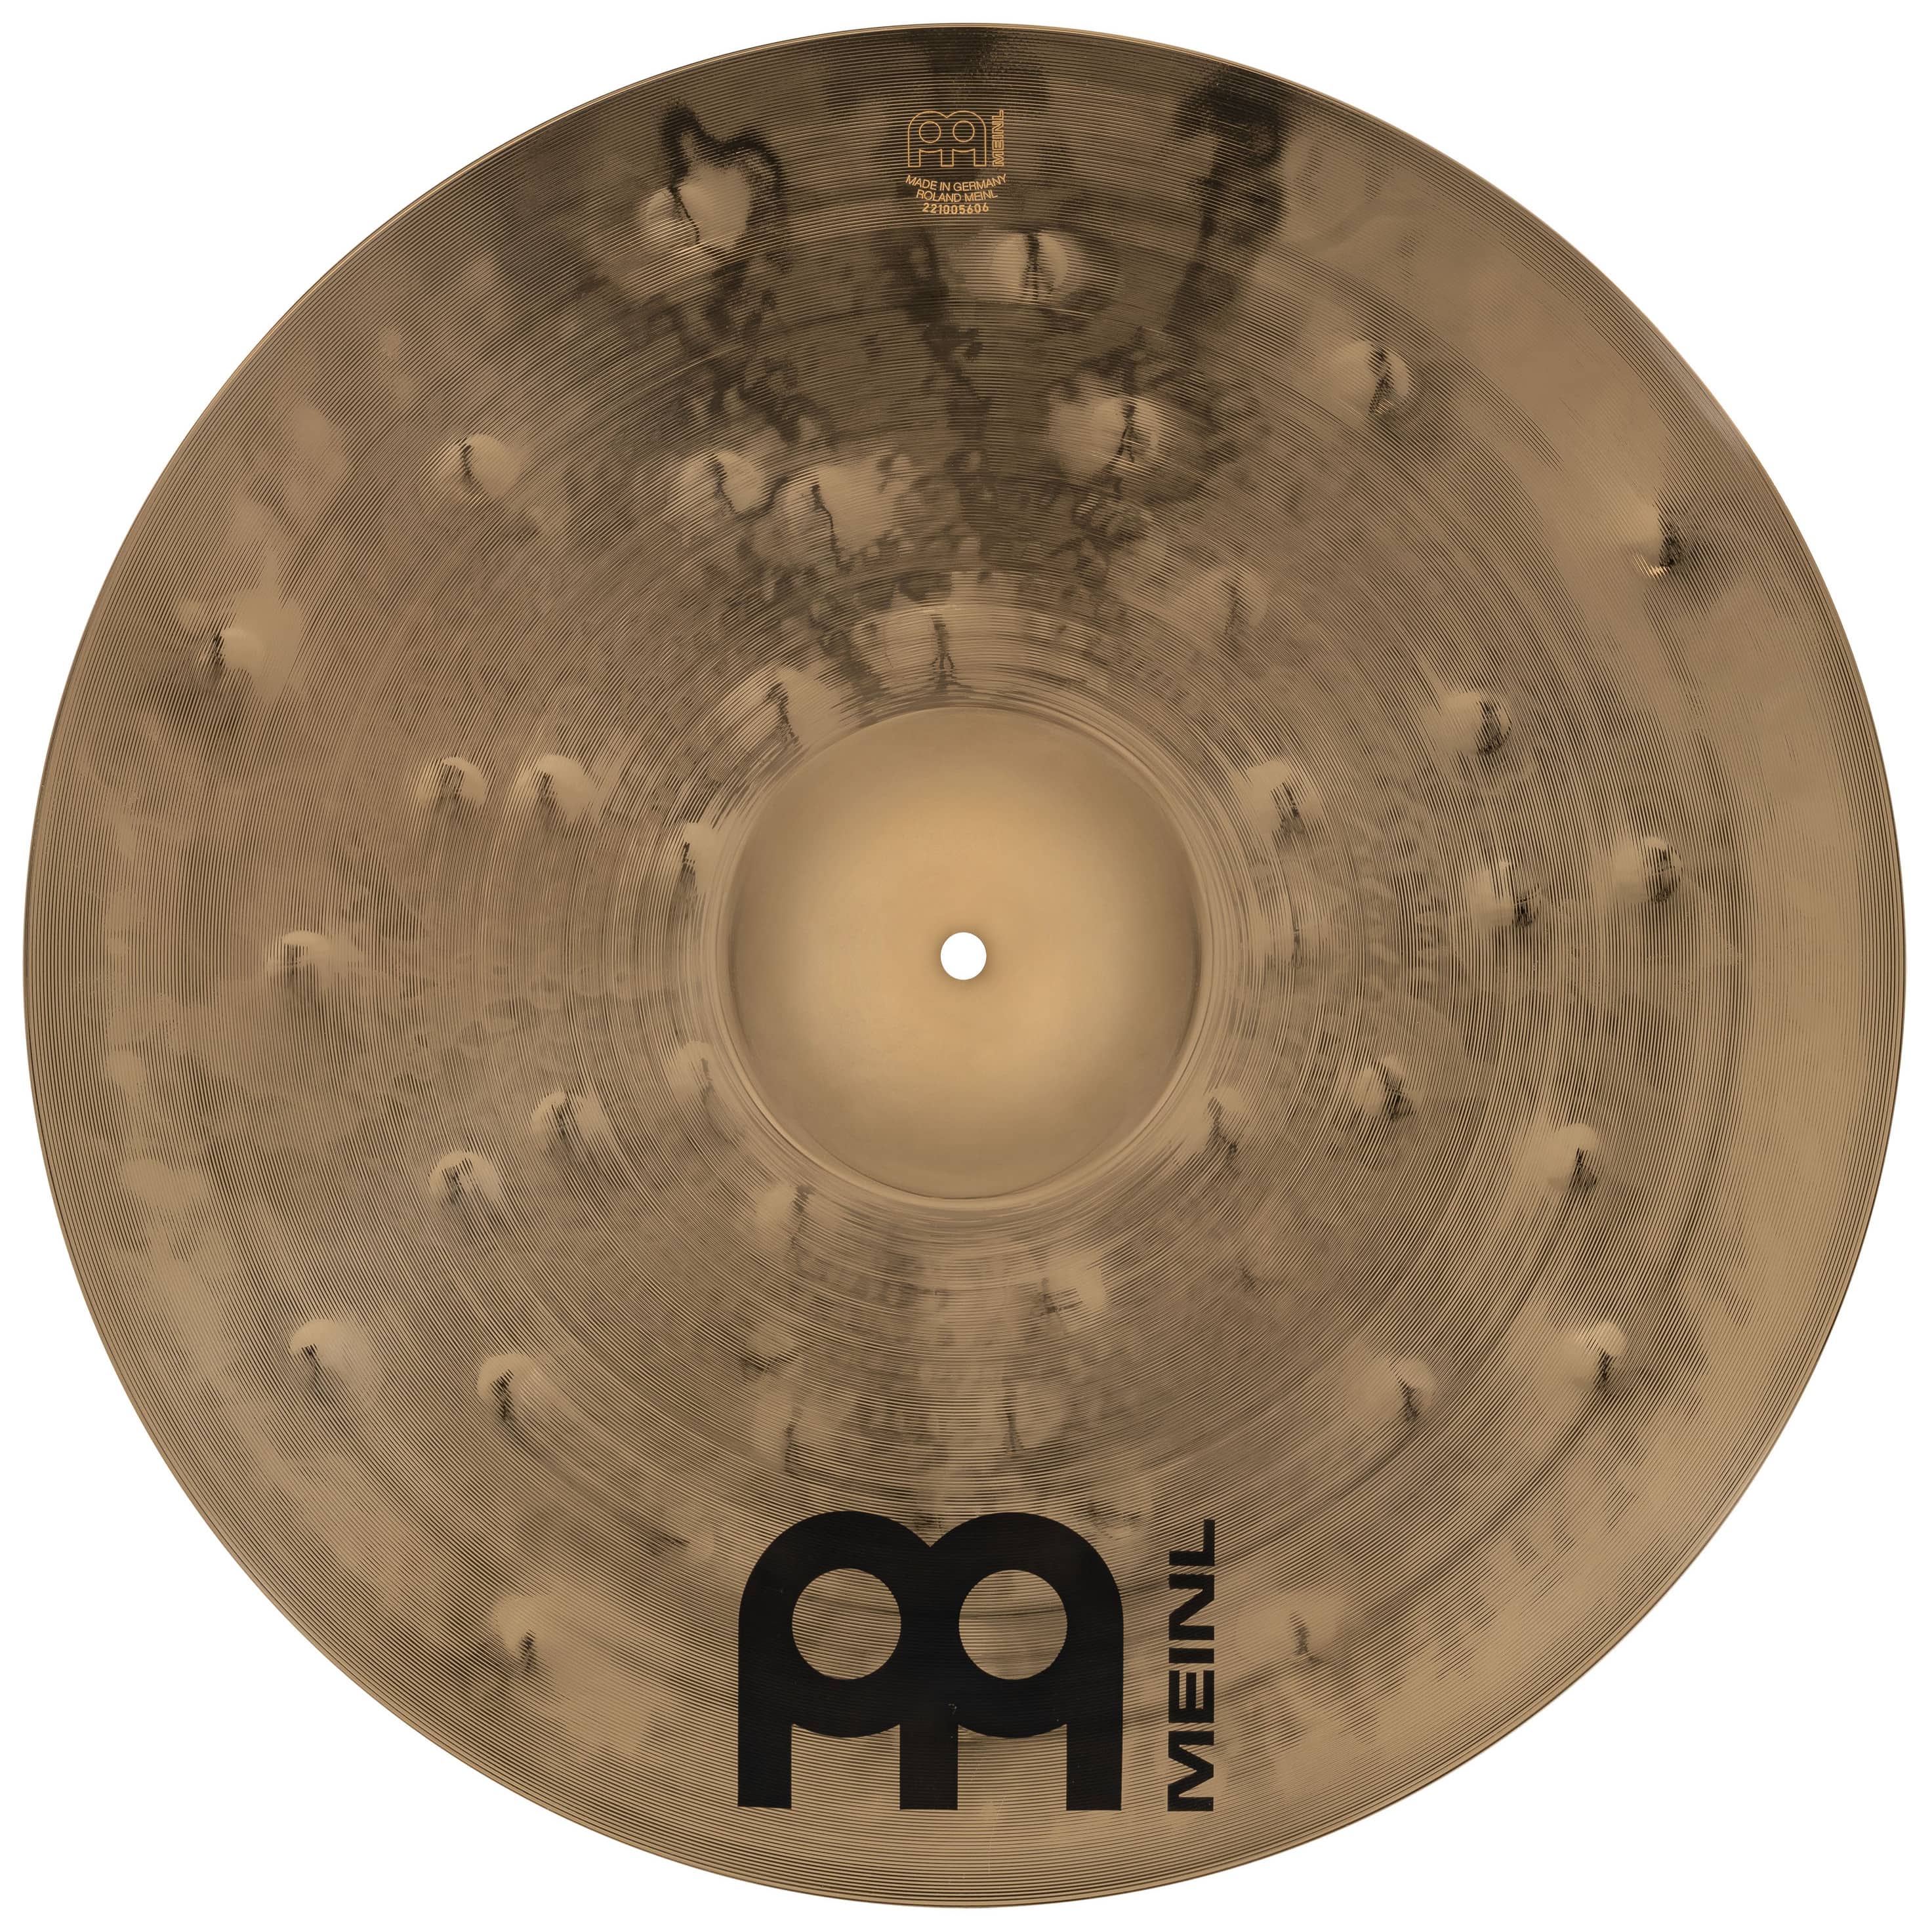 Meinl Cymbals PAC20ETHC - 20" Pure Alloy Custom Extra Thin Hammered Crash 1